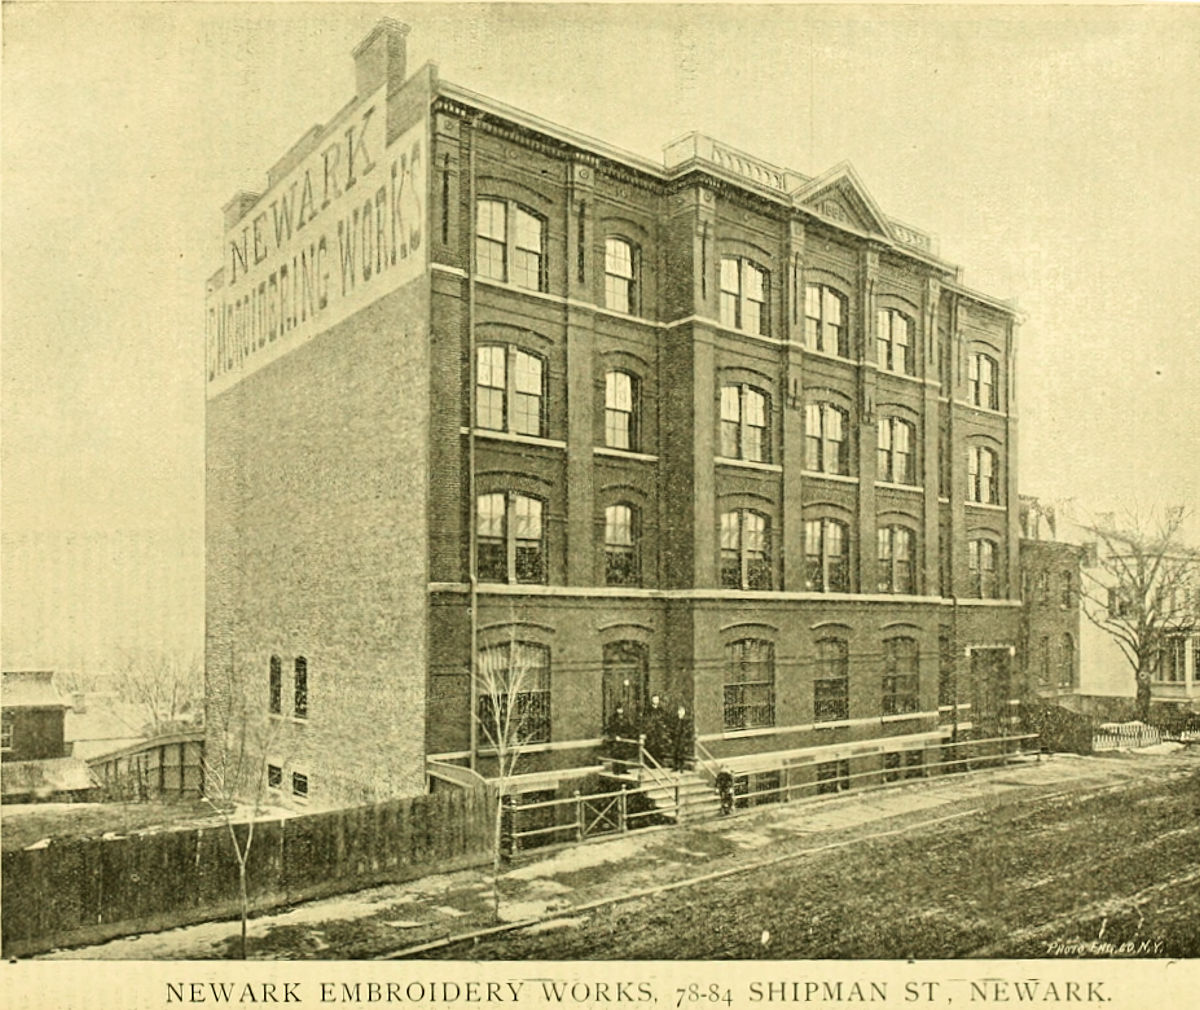 78-84 Shipman Street
1891
From “Newark and Its Leading Businessmen” 1891
